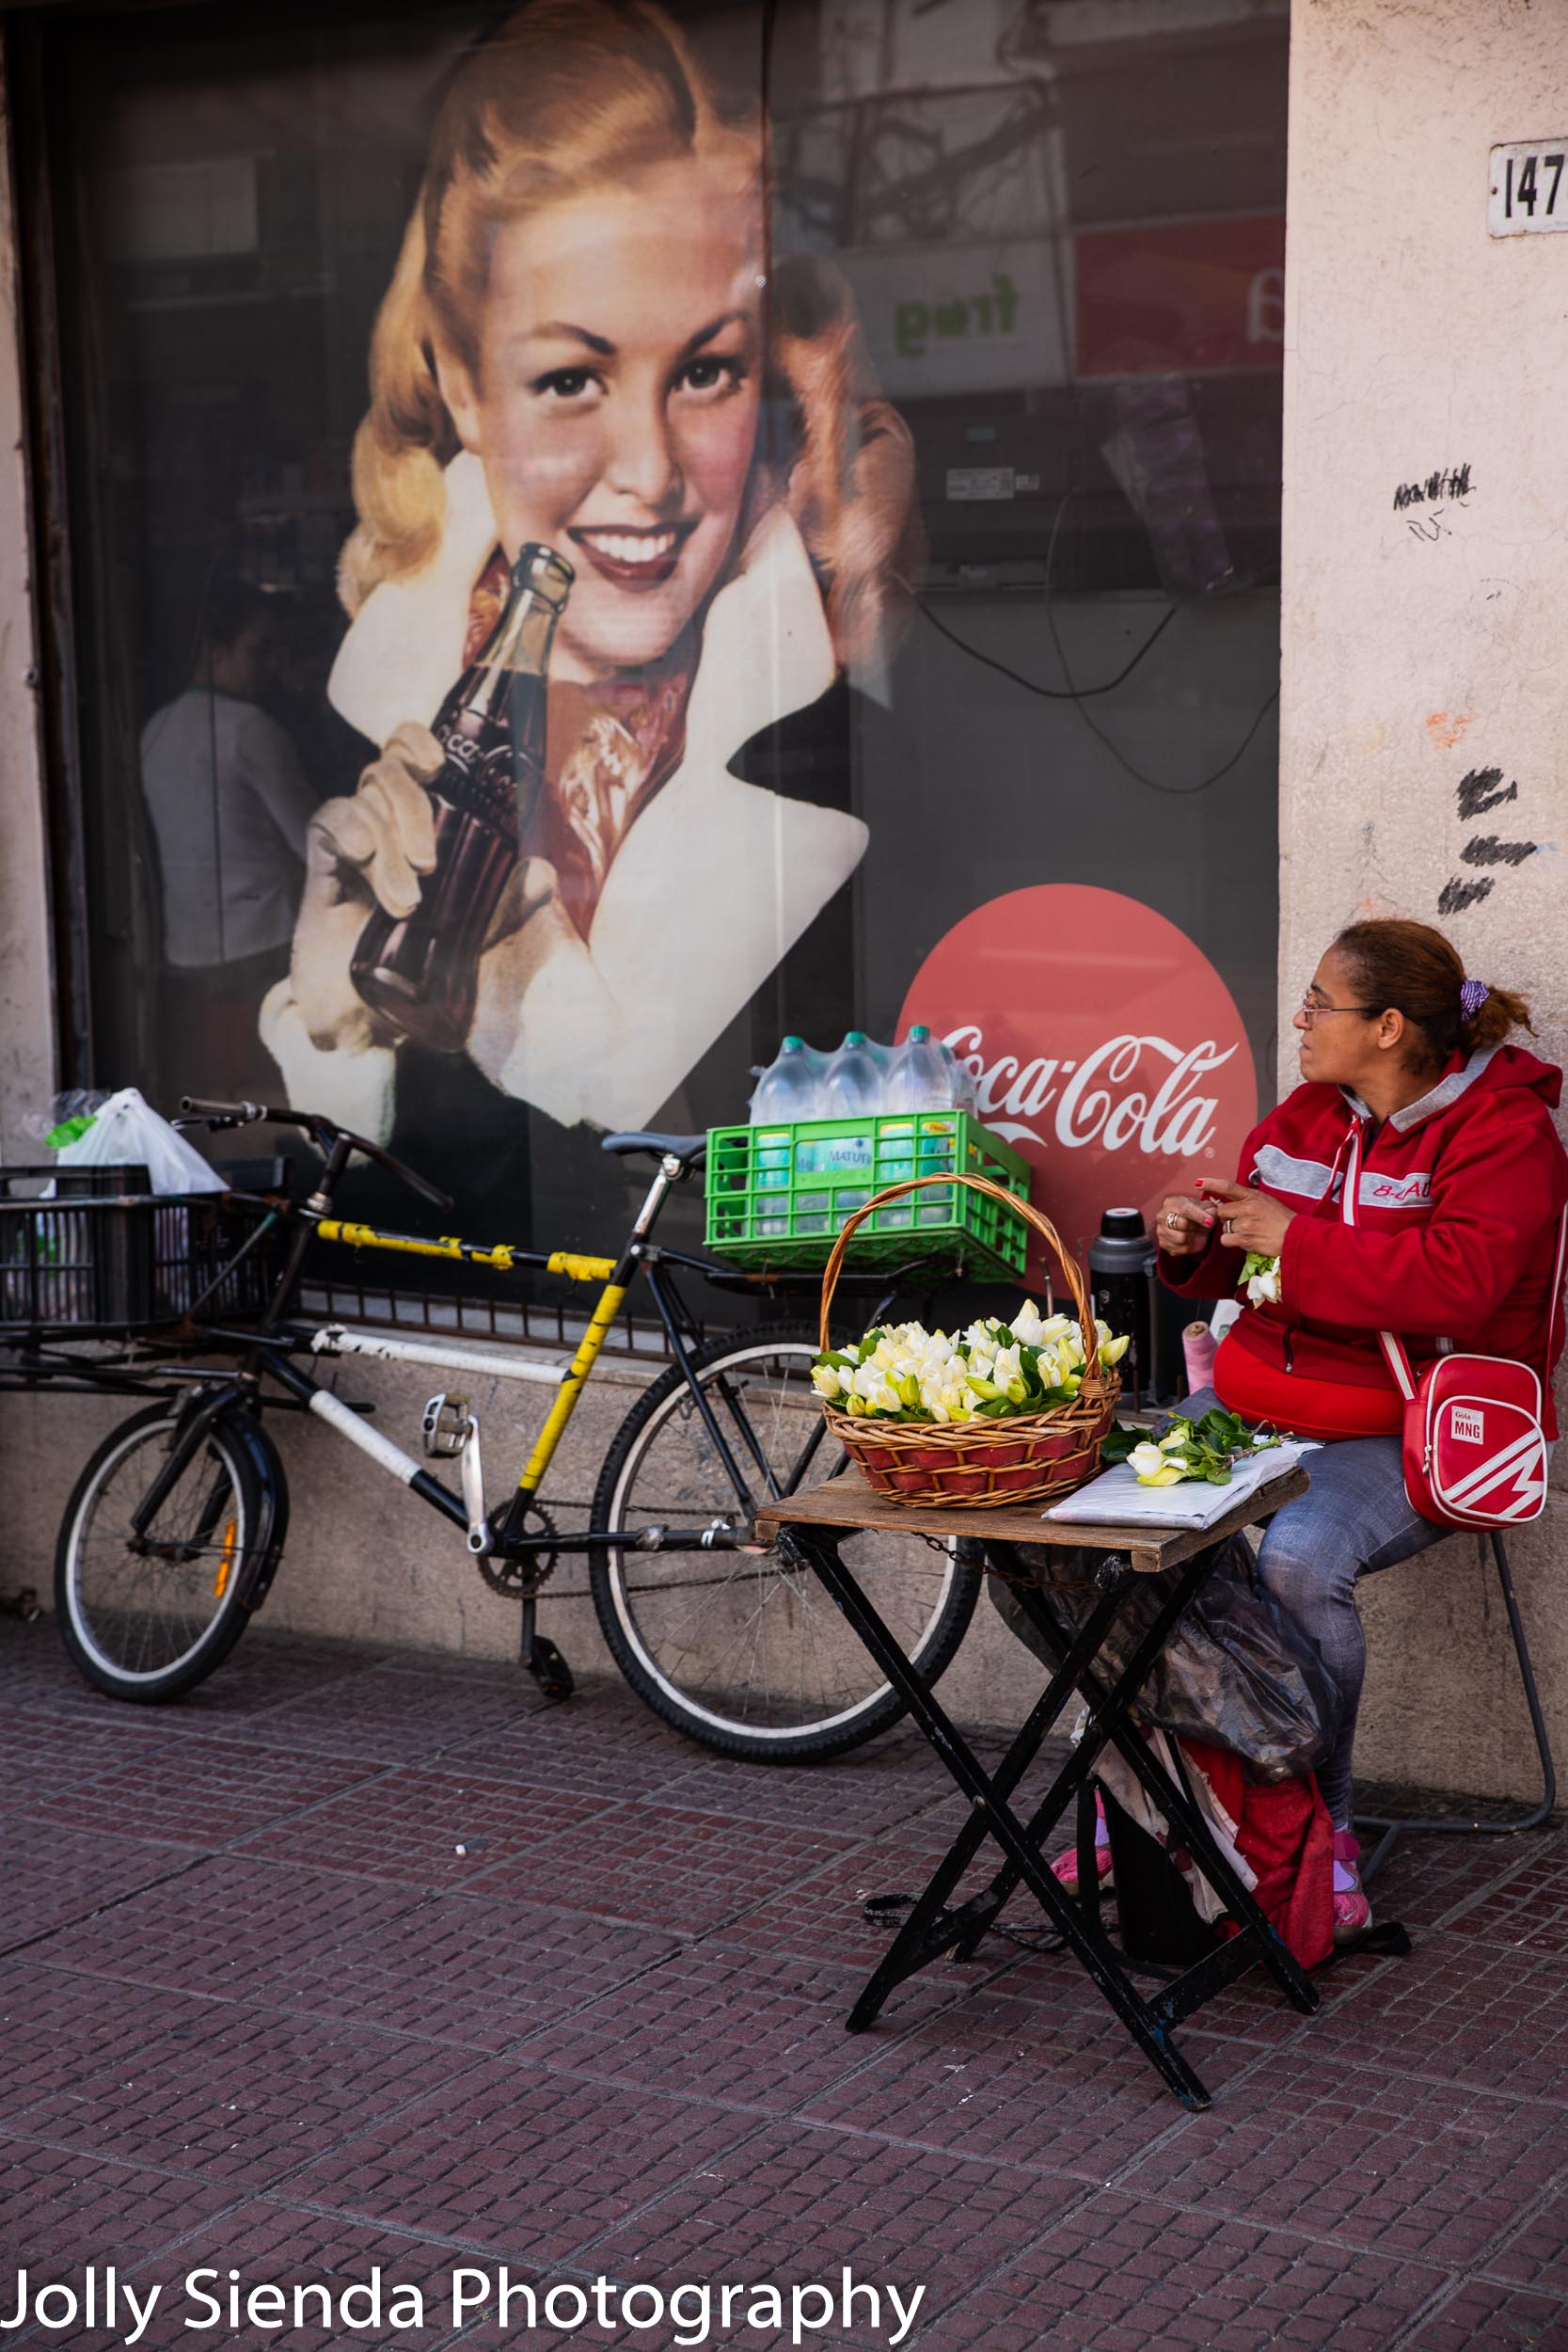 Woman selling vegetables and a Coca Cola sign